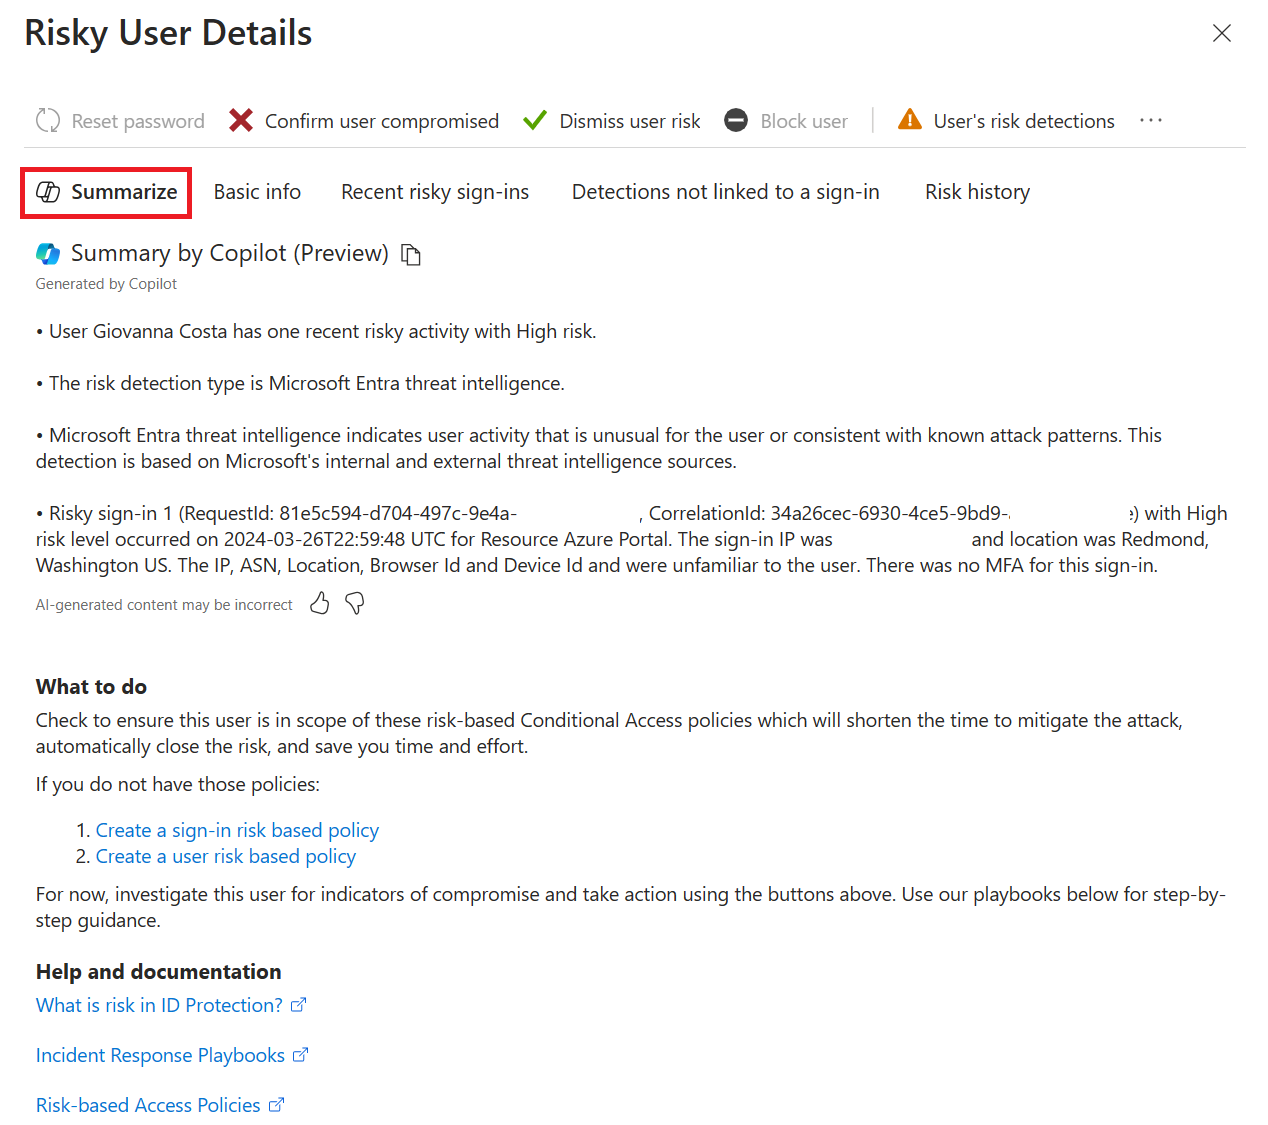 Screenshot that shows the Identity Protection risky user summarization details.